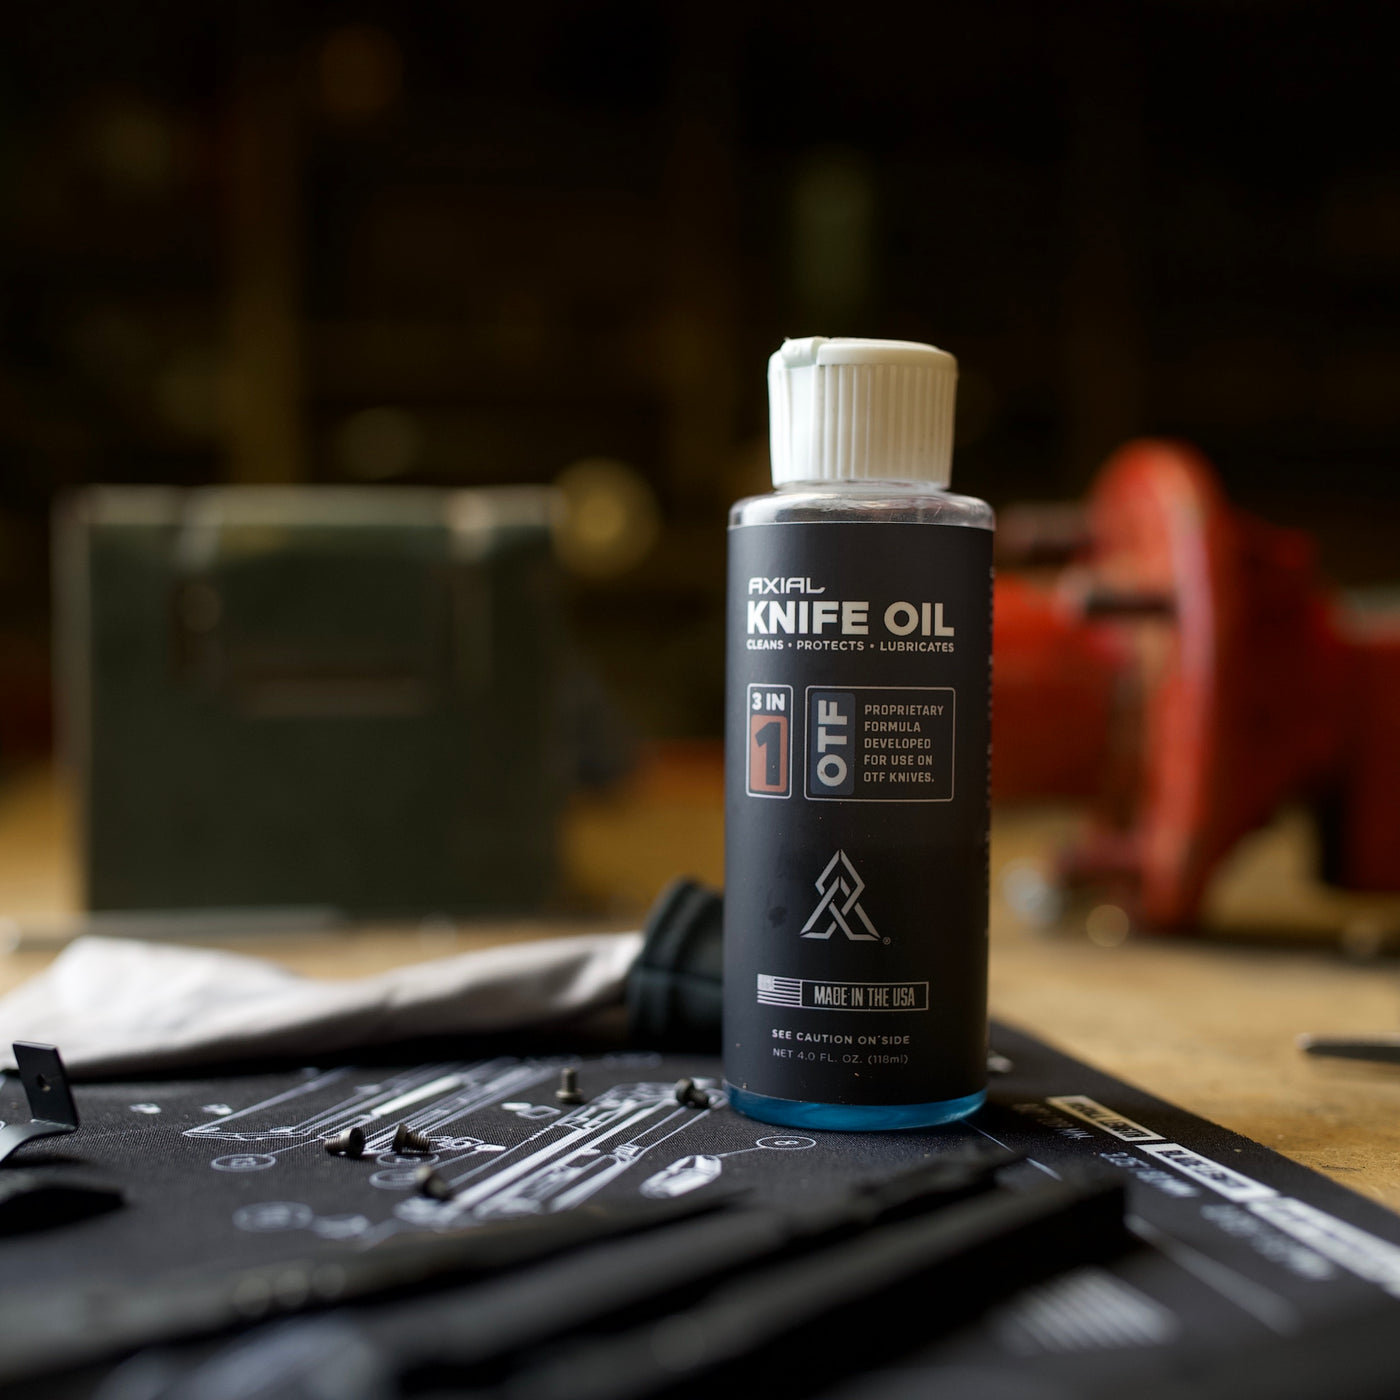 OTF Knife Oil Cleaner + Lubricant – Axial